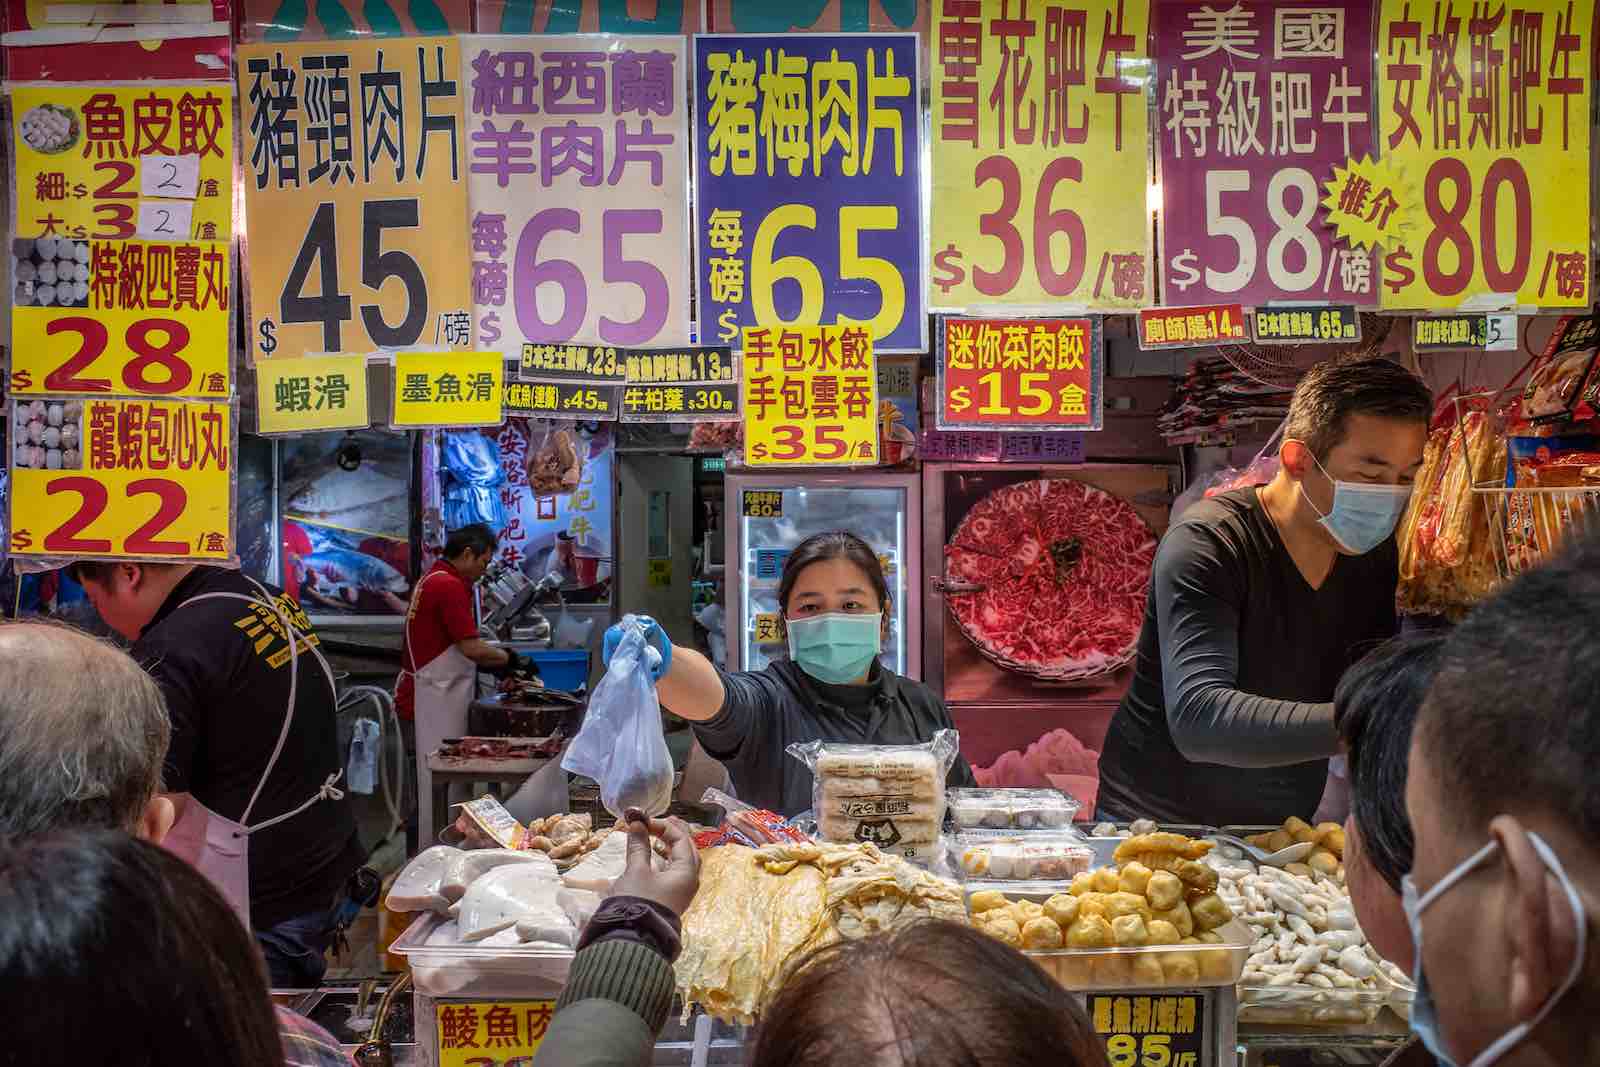 A Hong Kong market on 29 January (Photo: Anthony Kwan/Getty Images)